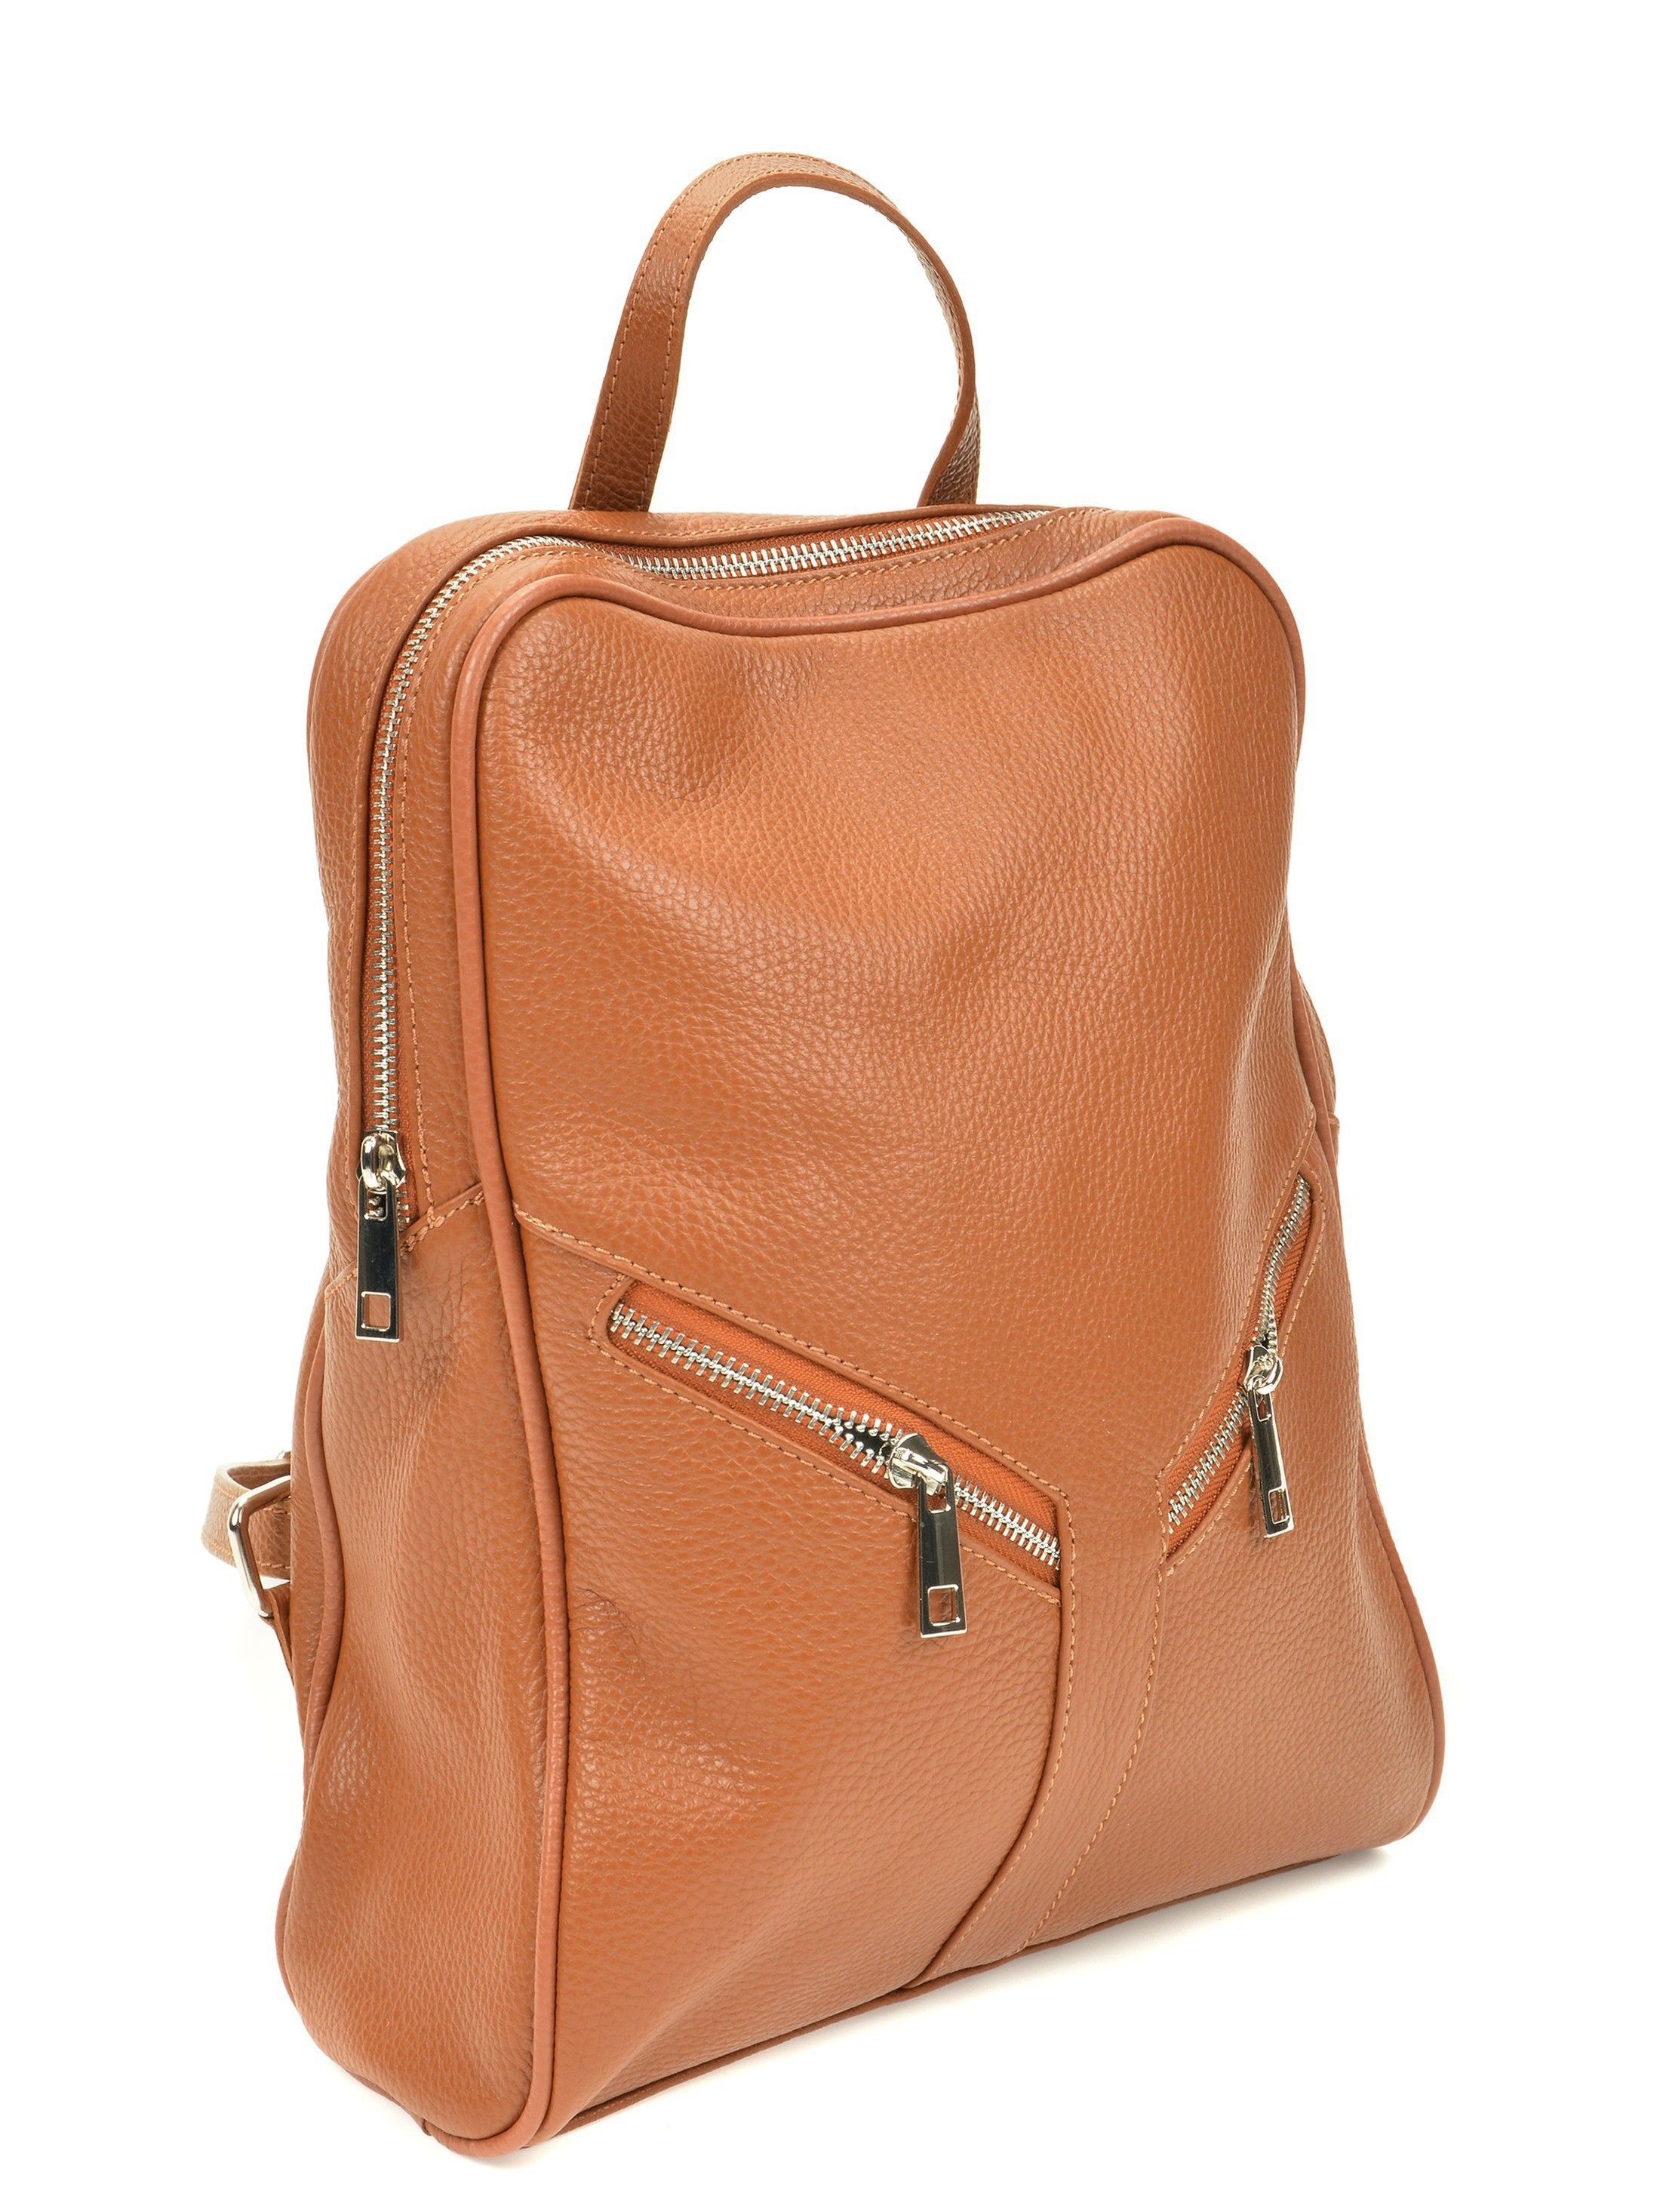 Backpack
100% cow leather
Top zip closure
Inner zip pocket and phone compartment
Two front zip pockets
Back zip pocket
Dimensions (L): 34x27x8 cm
Handle: 28 cm FIX
Shoulder strap: 2x80 - adjustable